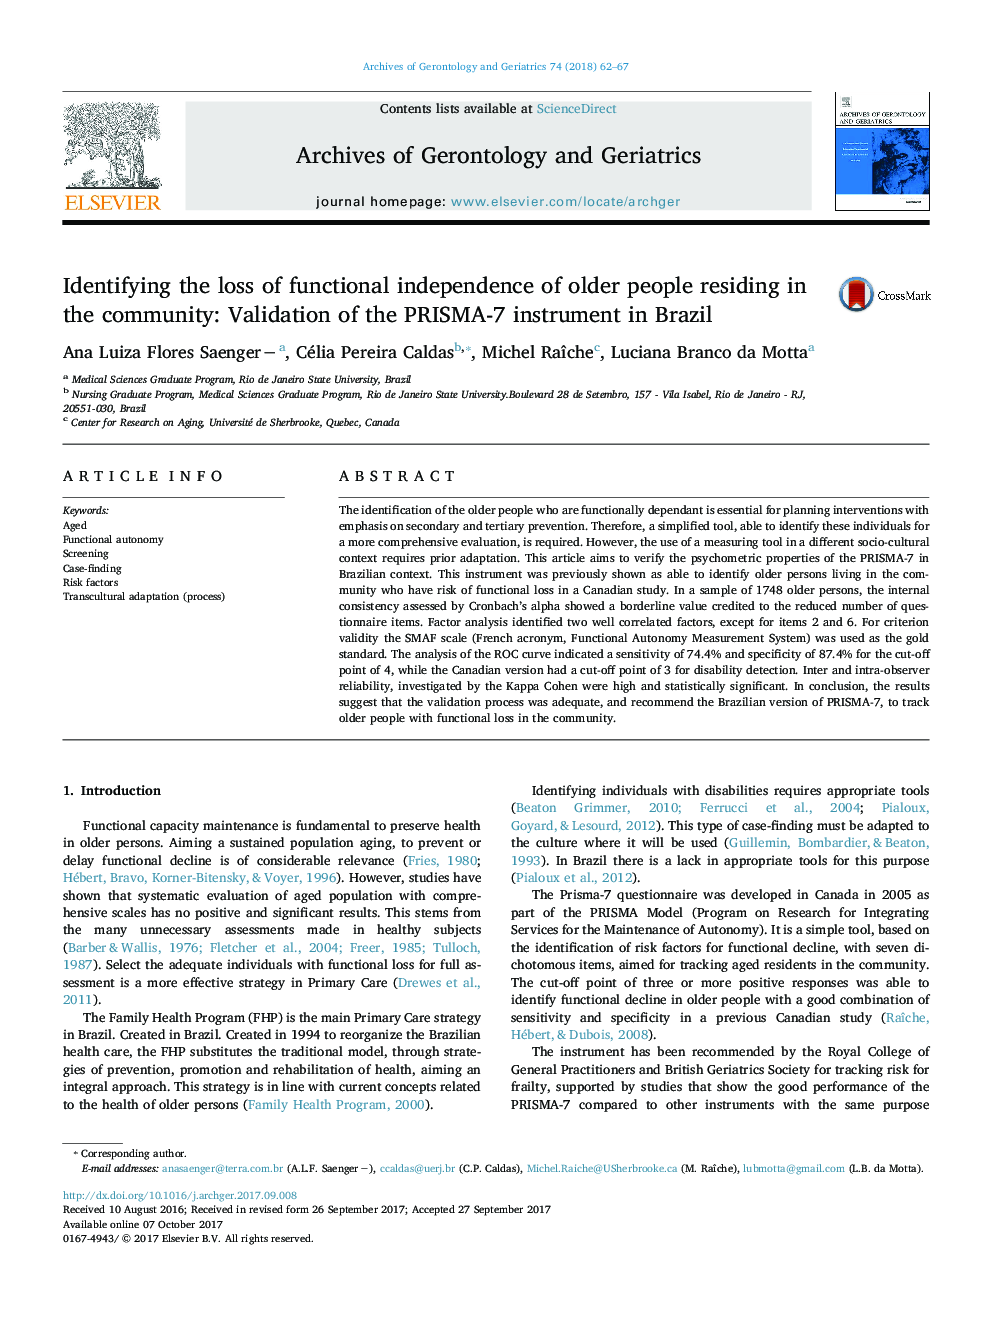 Identifying the loss of functional independence of older people residing in the community: Validation of the PRISMA-7 instrument in Brazil